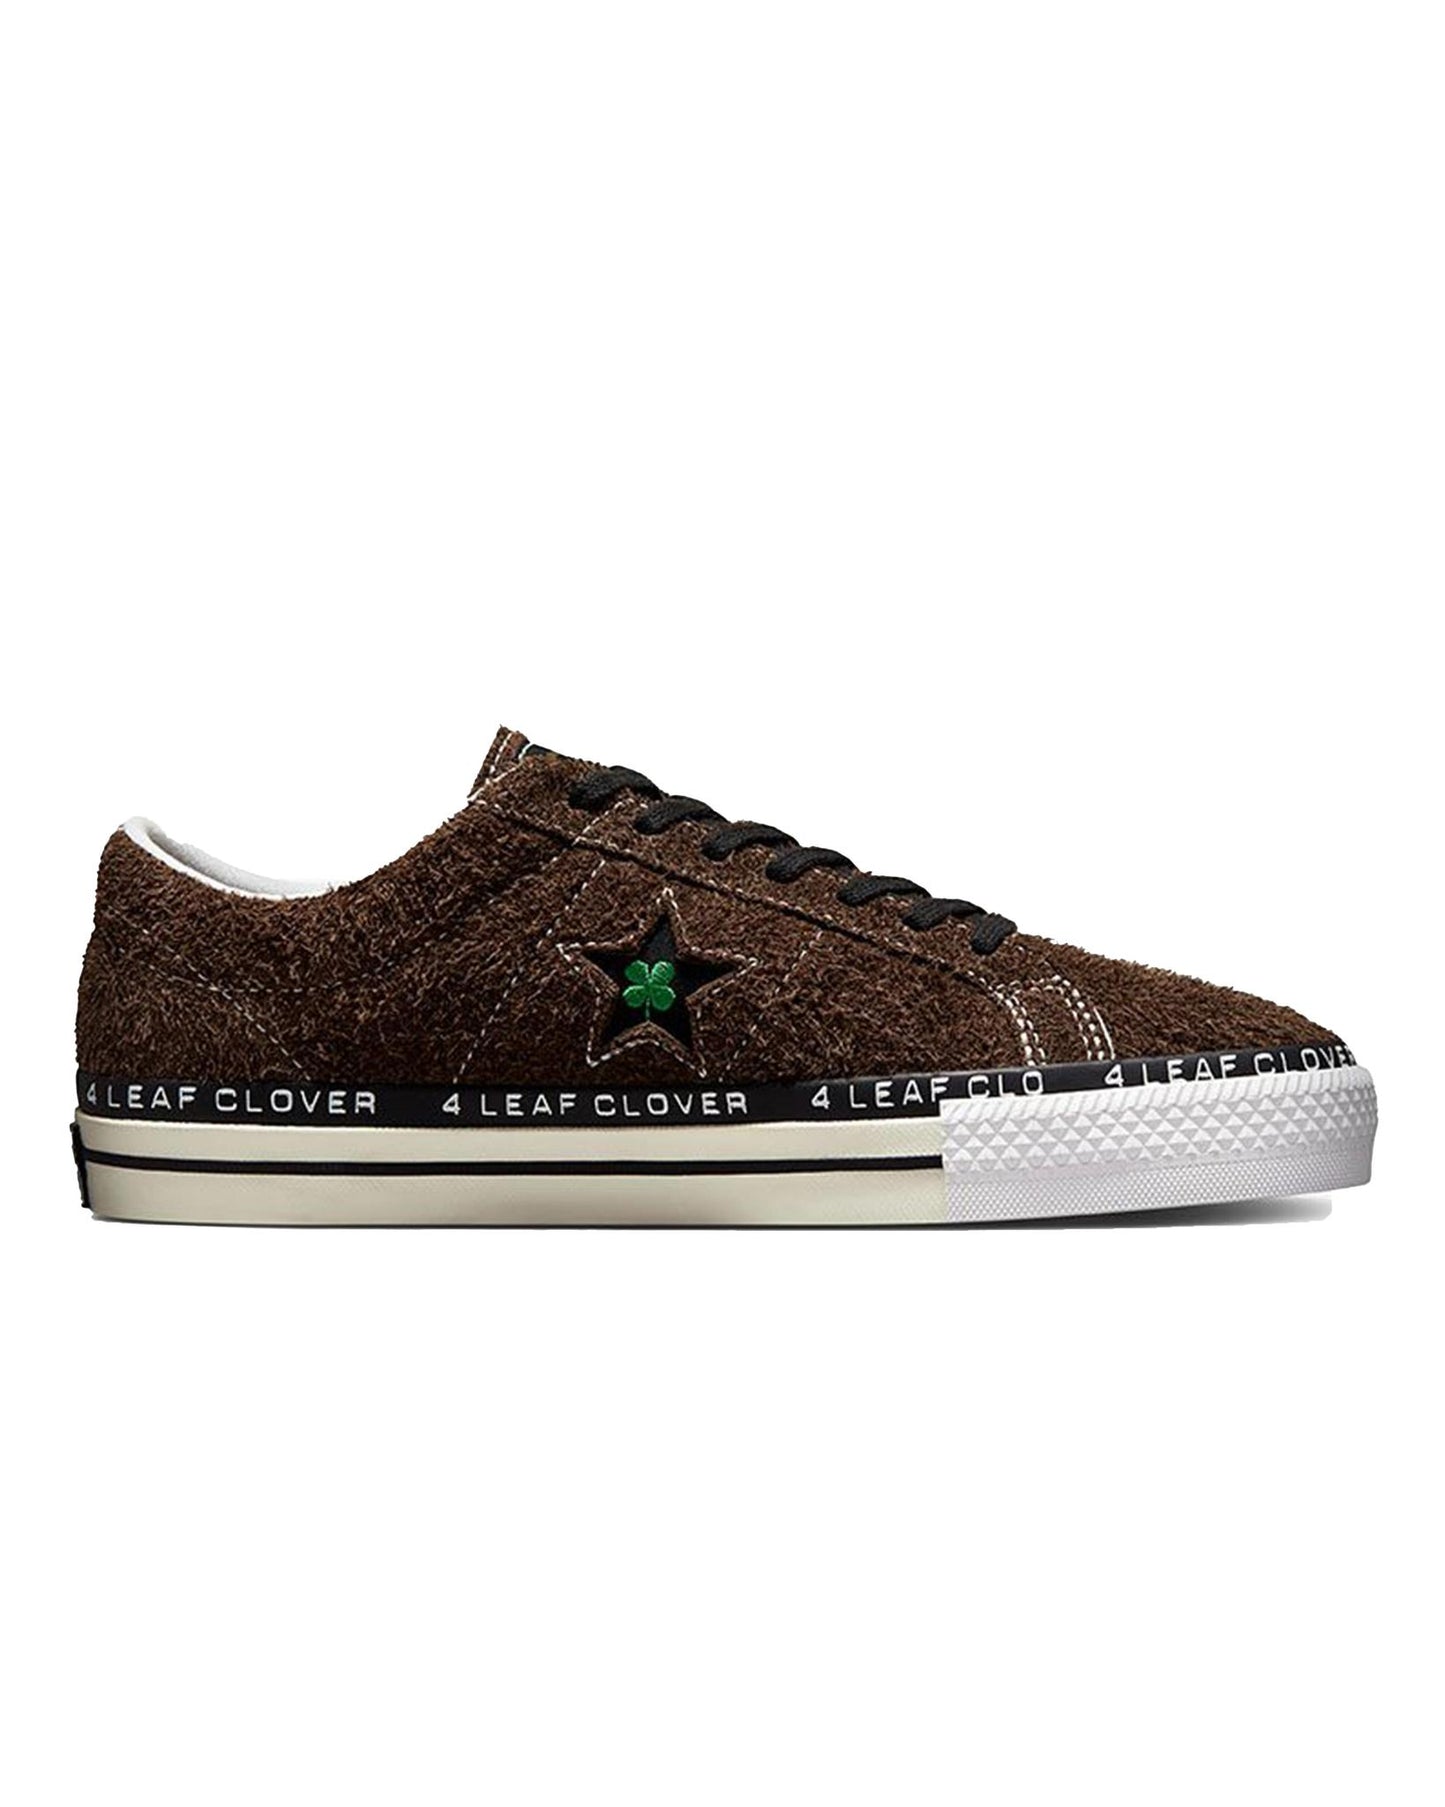 Converse x Patta Four Leaf Clover One Star Pro Low STASHED